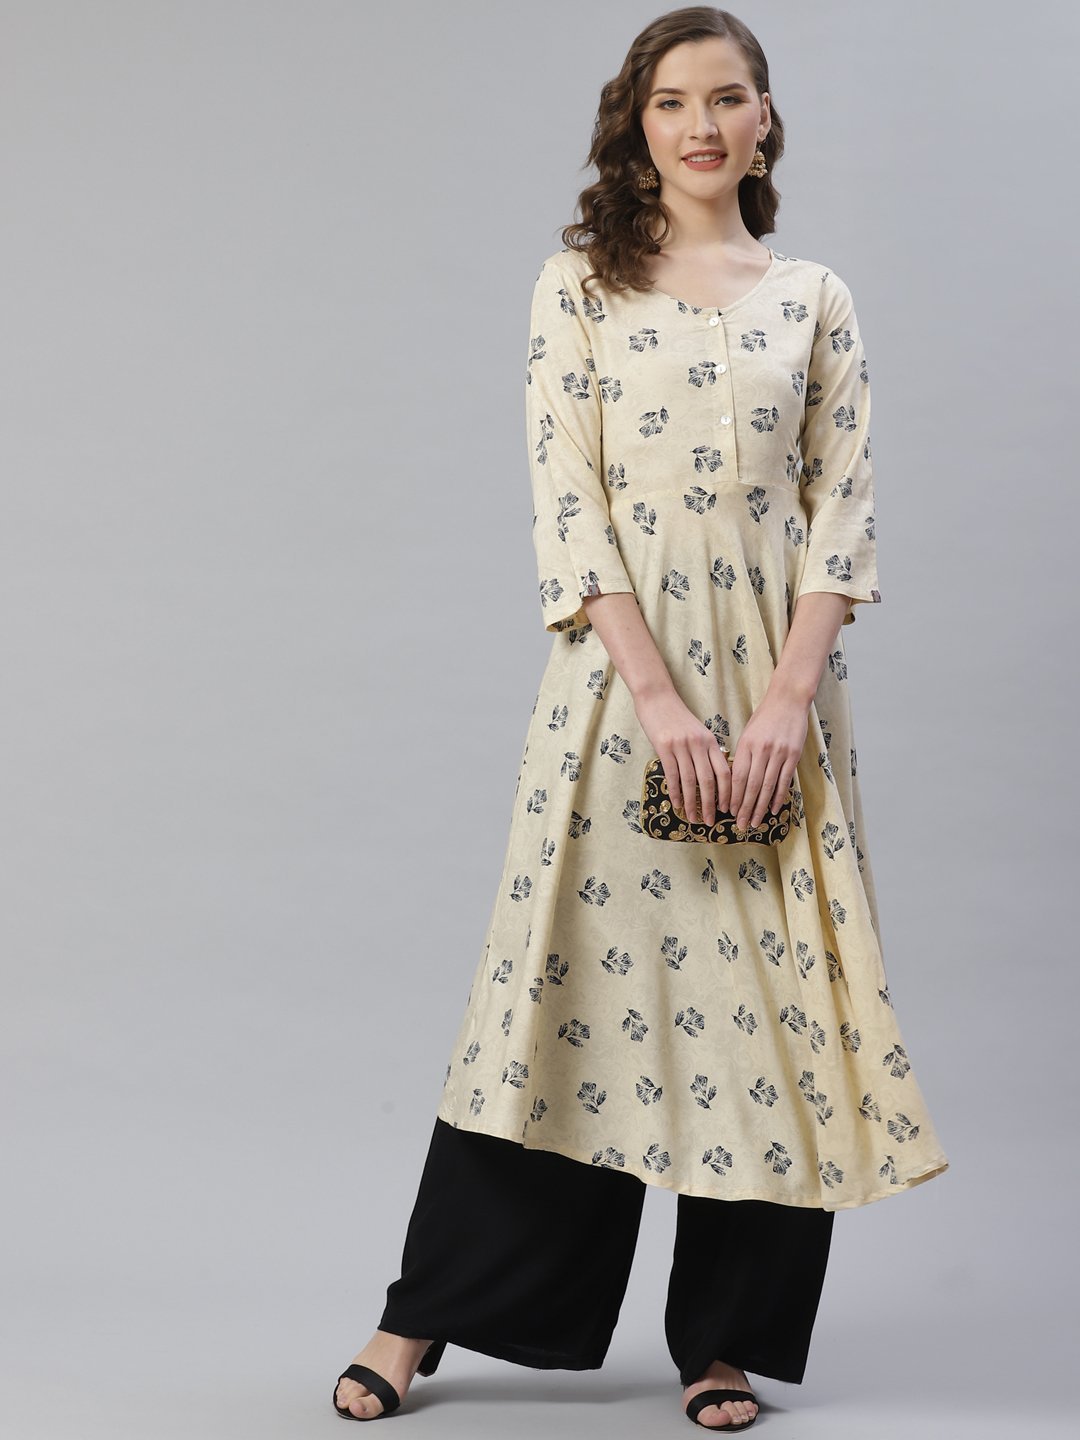 Women's Off White & Black Floral Printed A Line Kurta - Jompers